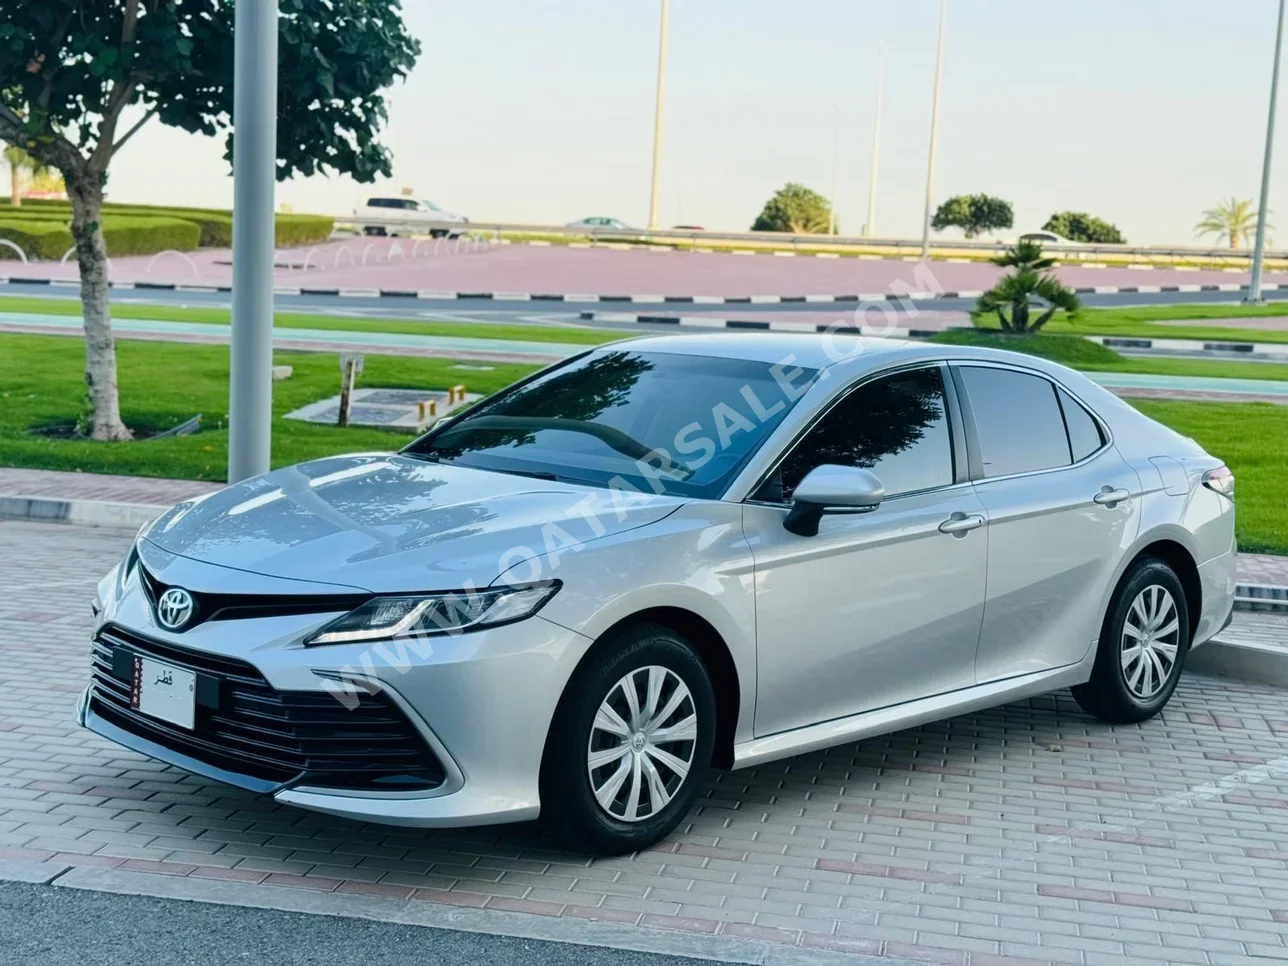 Toyota  Camry  LE  2023  Automatic  18,000 Km  4 Cylinder  Front Wheel Drive (FWD)  Sedan  Silver  With Warranty